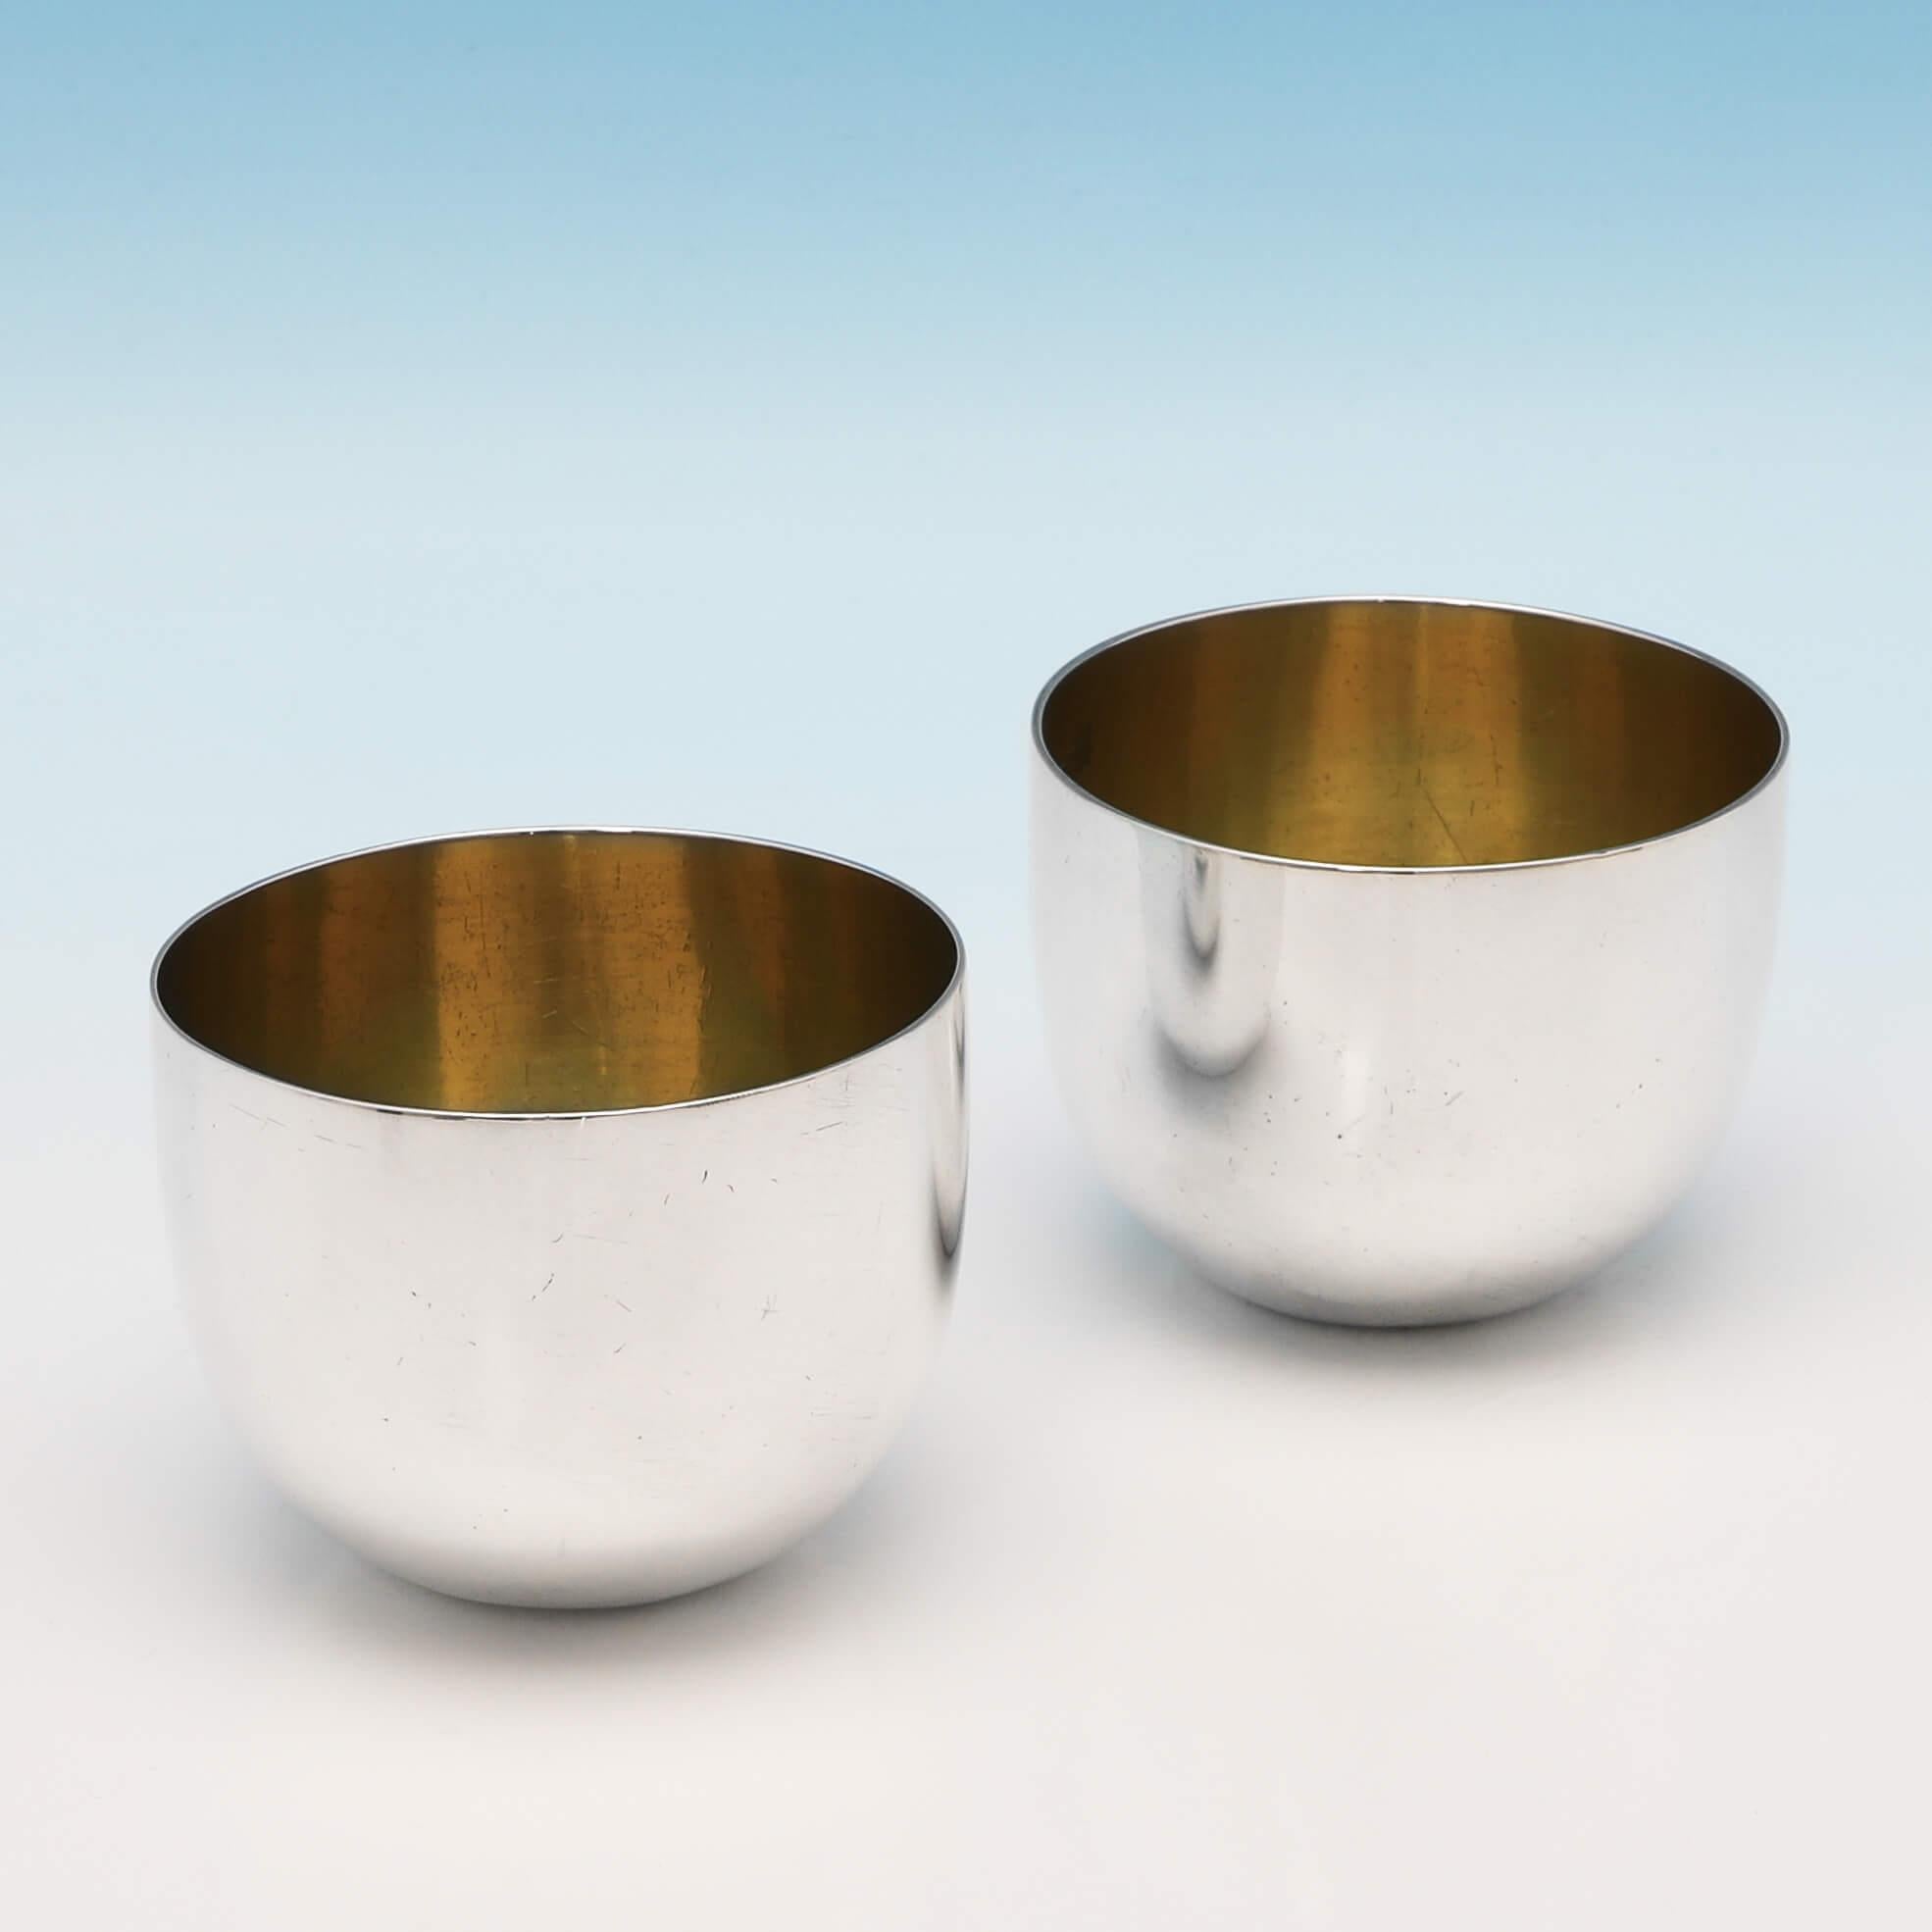 Hallmarked in London in 1793 by Richard Evans, this handsome, pair of George III, antique sterling silver tumbler cups, are plain in style, with gilt interiors. Each tumbler cup measures: 2